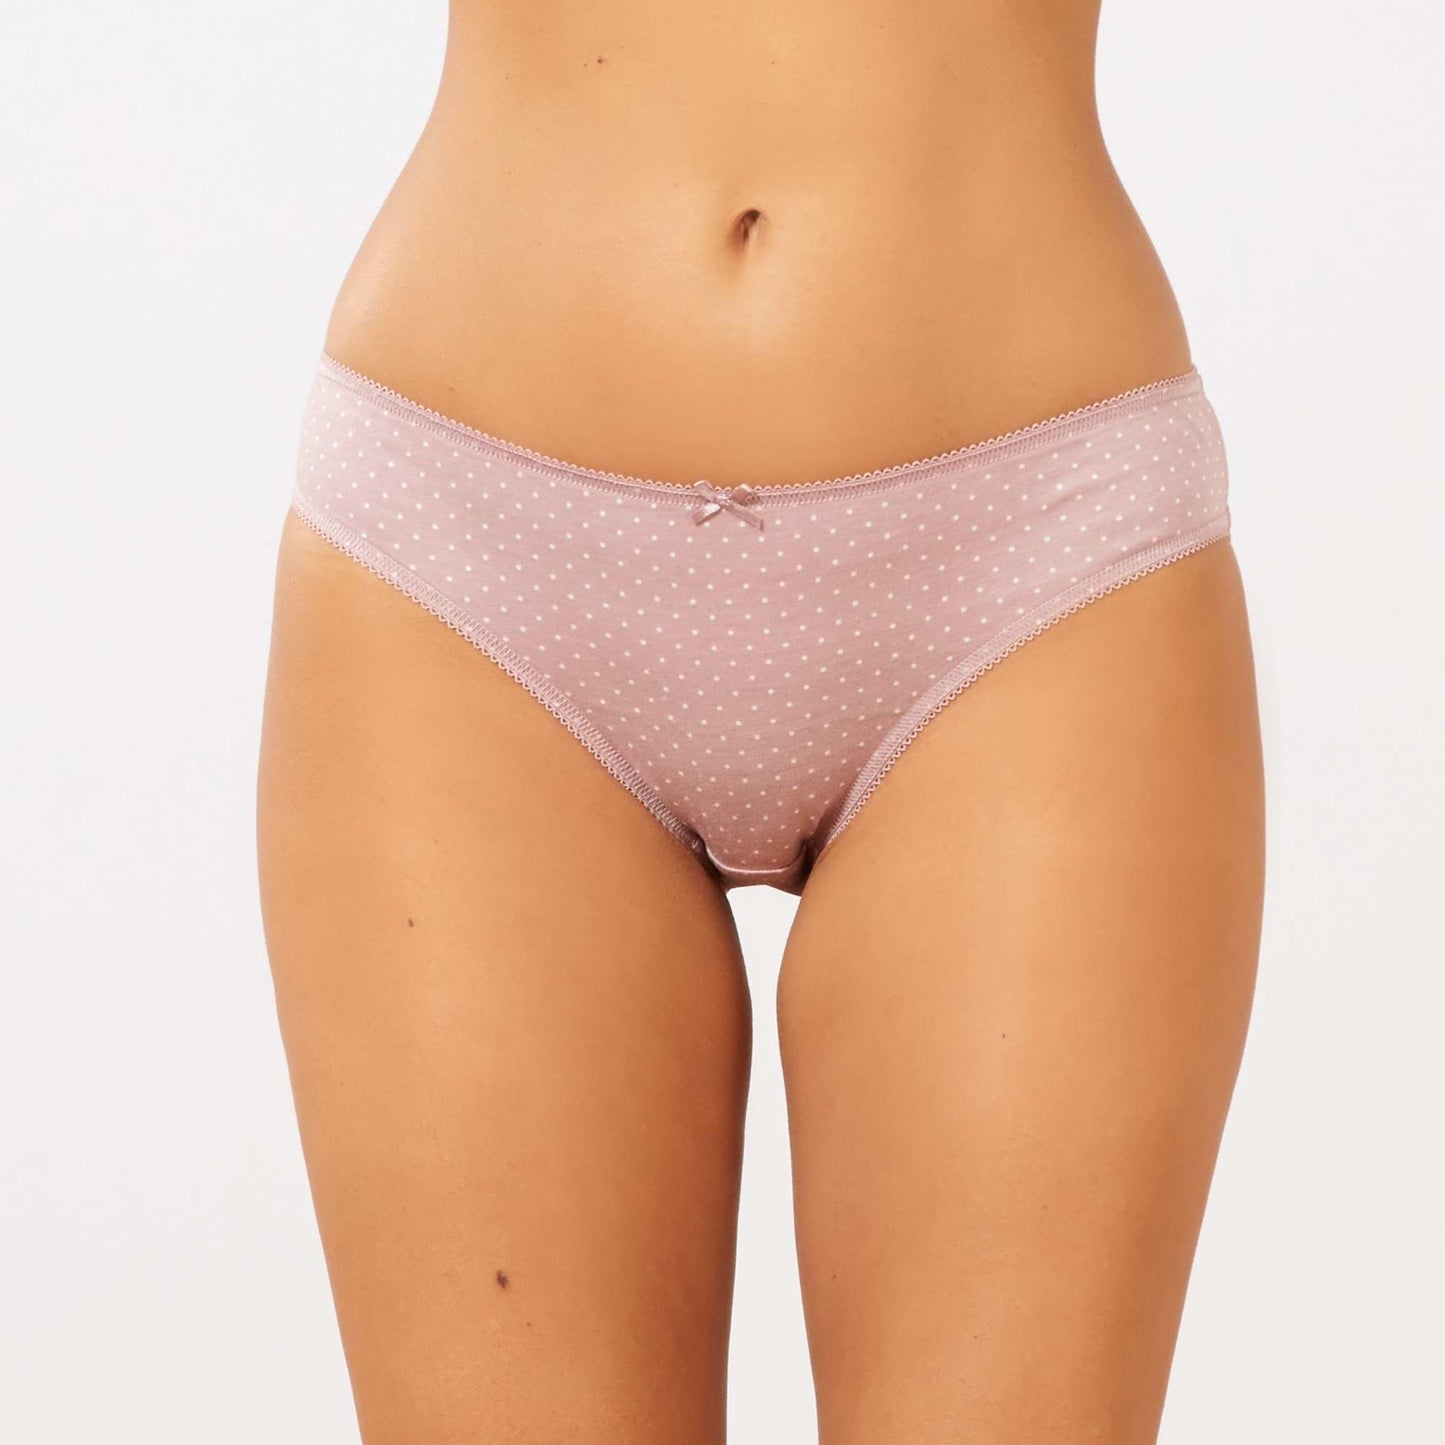 Pack of 3 briefs PINK